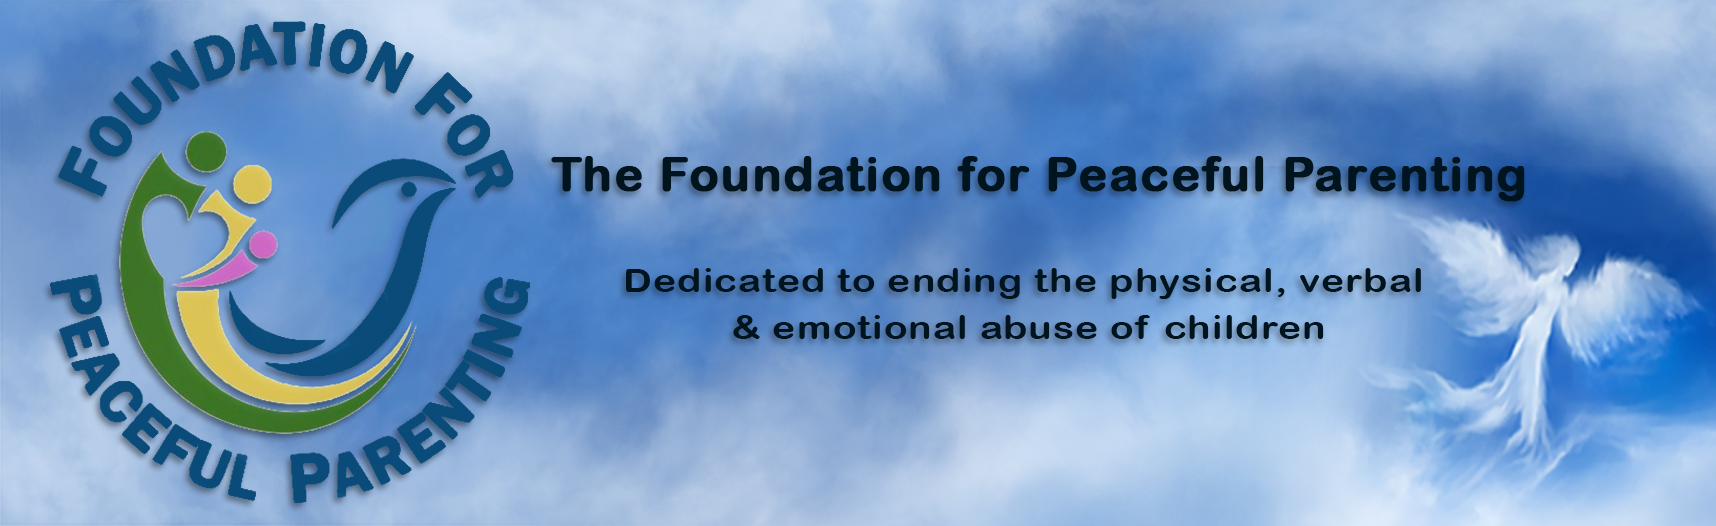 Welcome to the Foundation for Peaceful Parenting